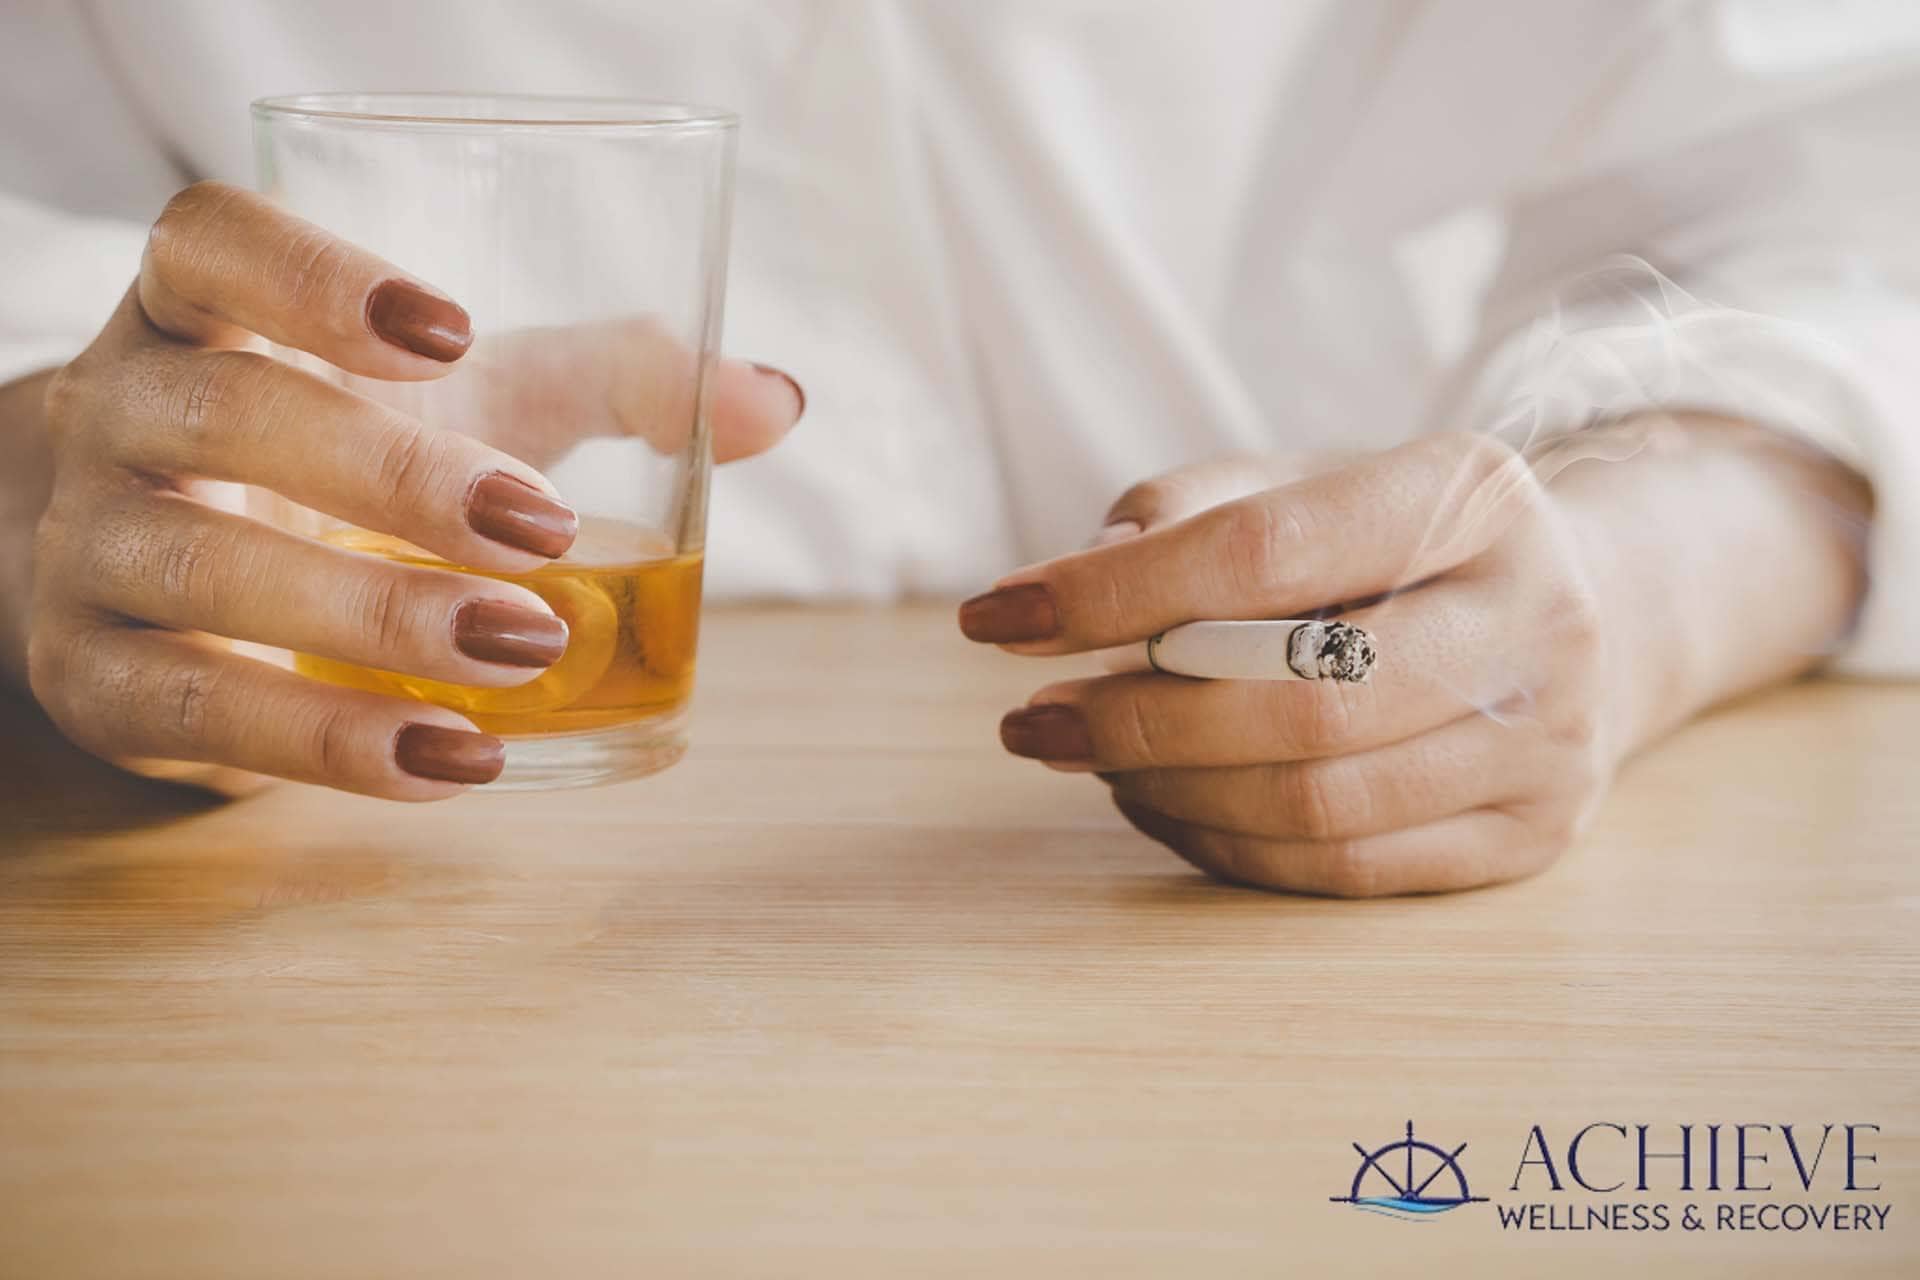 Drug and alcohol rehab with inpatient treatment options. Do many treatment centers offer medication assisted treatment?